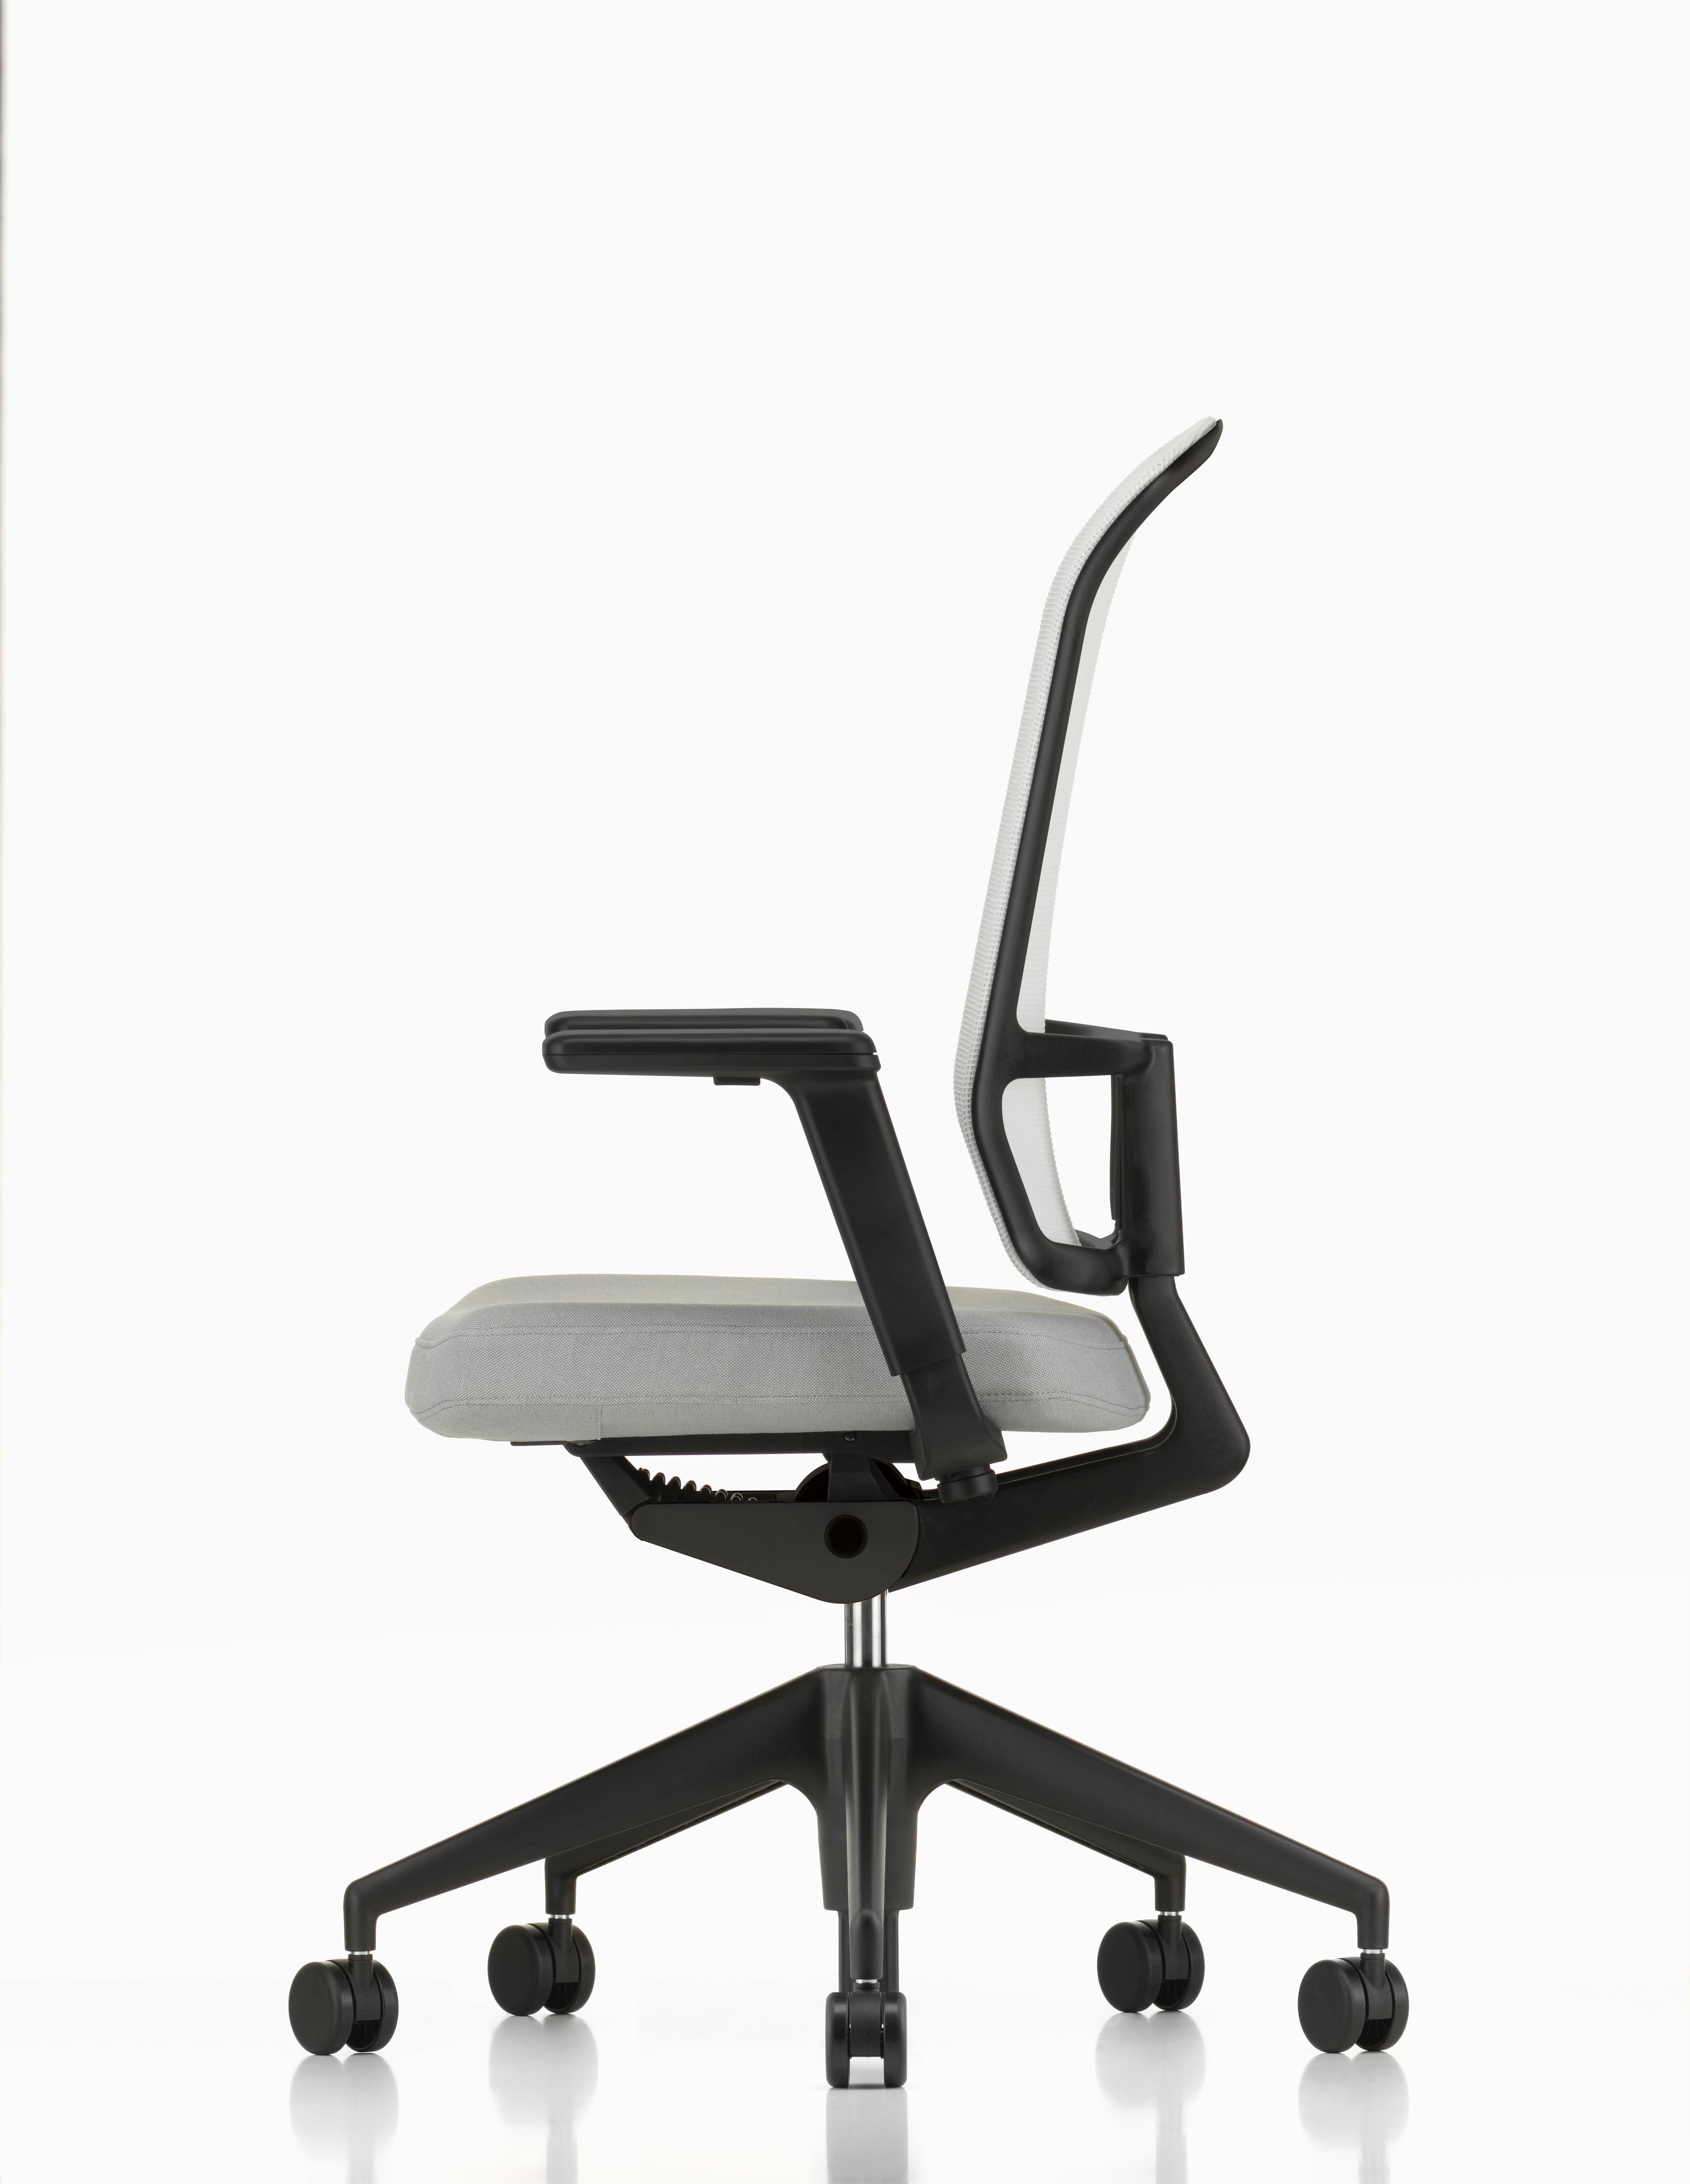 Vitra AM Chair in White and Cream by Alberto Meda (Moderne) im Angebot